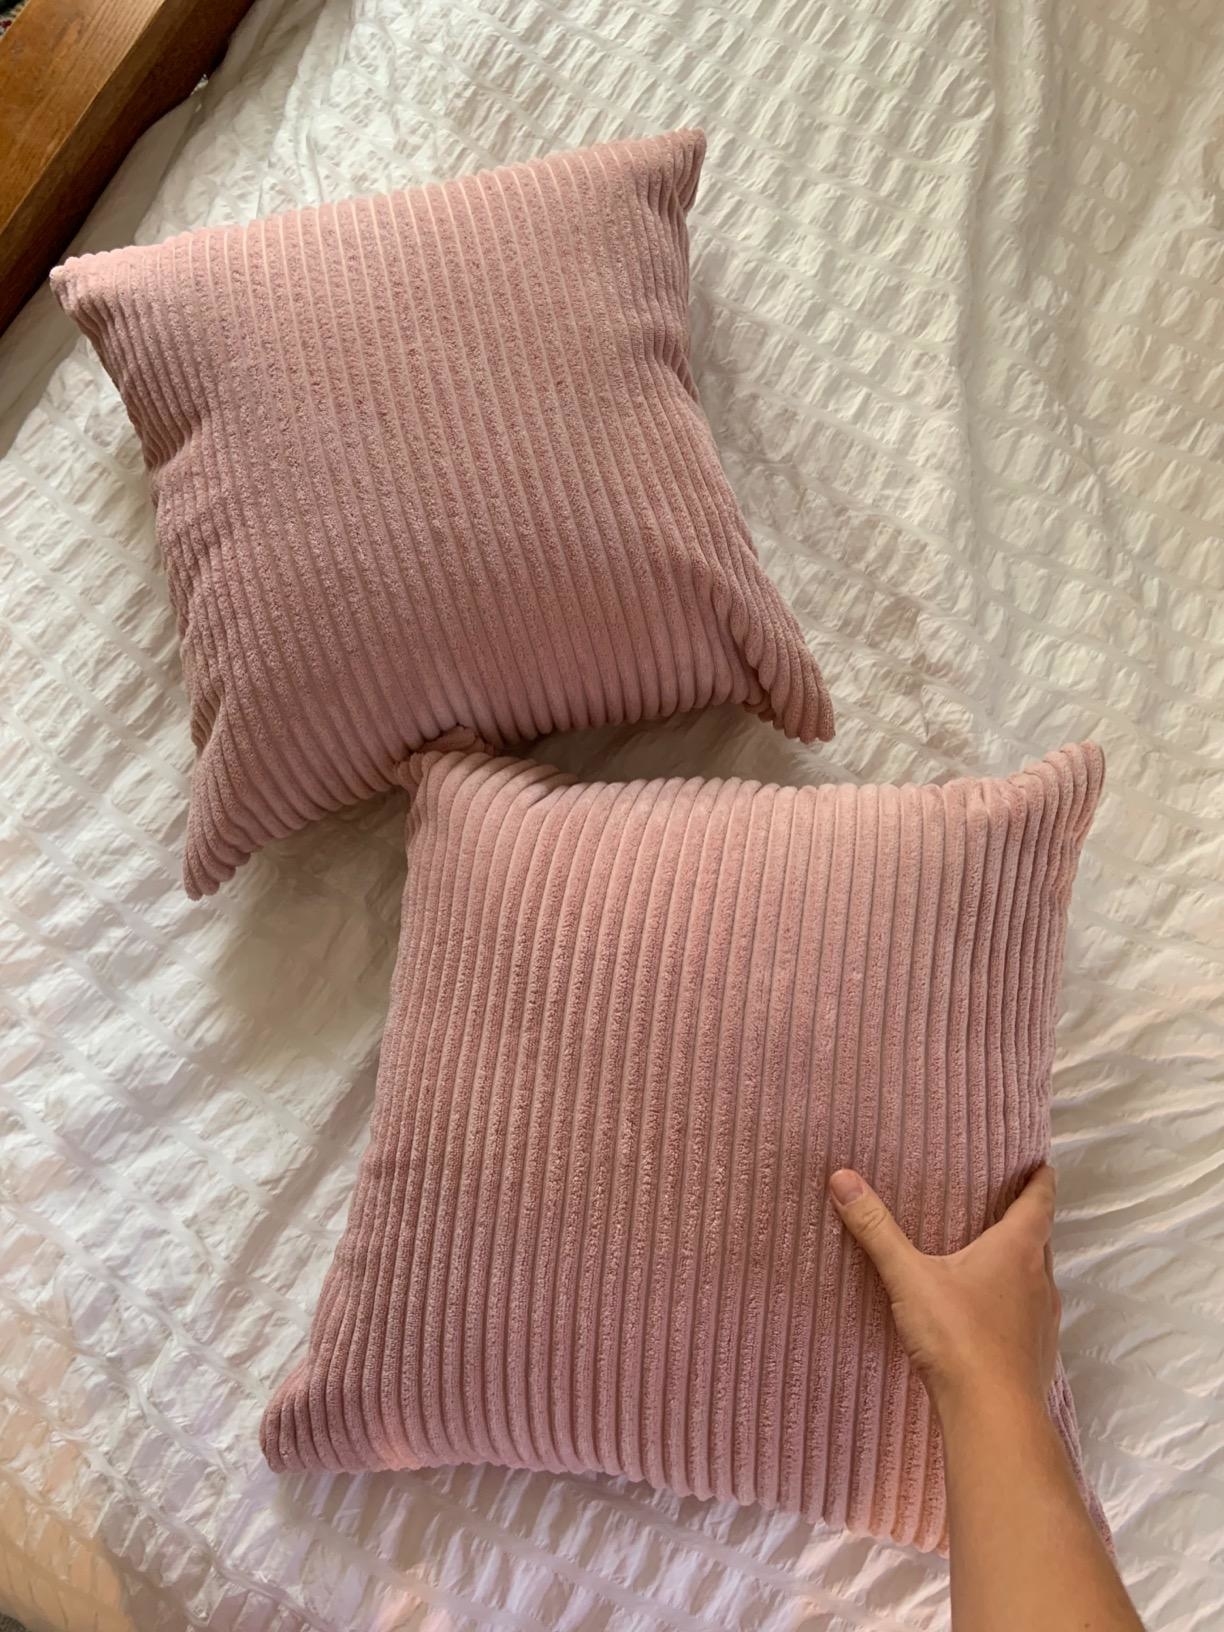 a hand touching one of the pink pillow covers